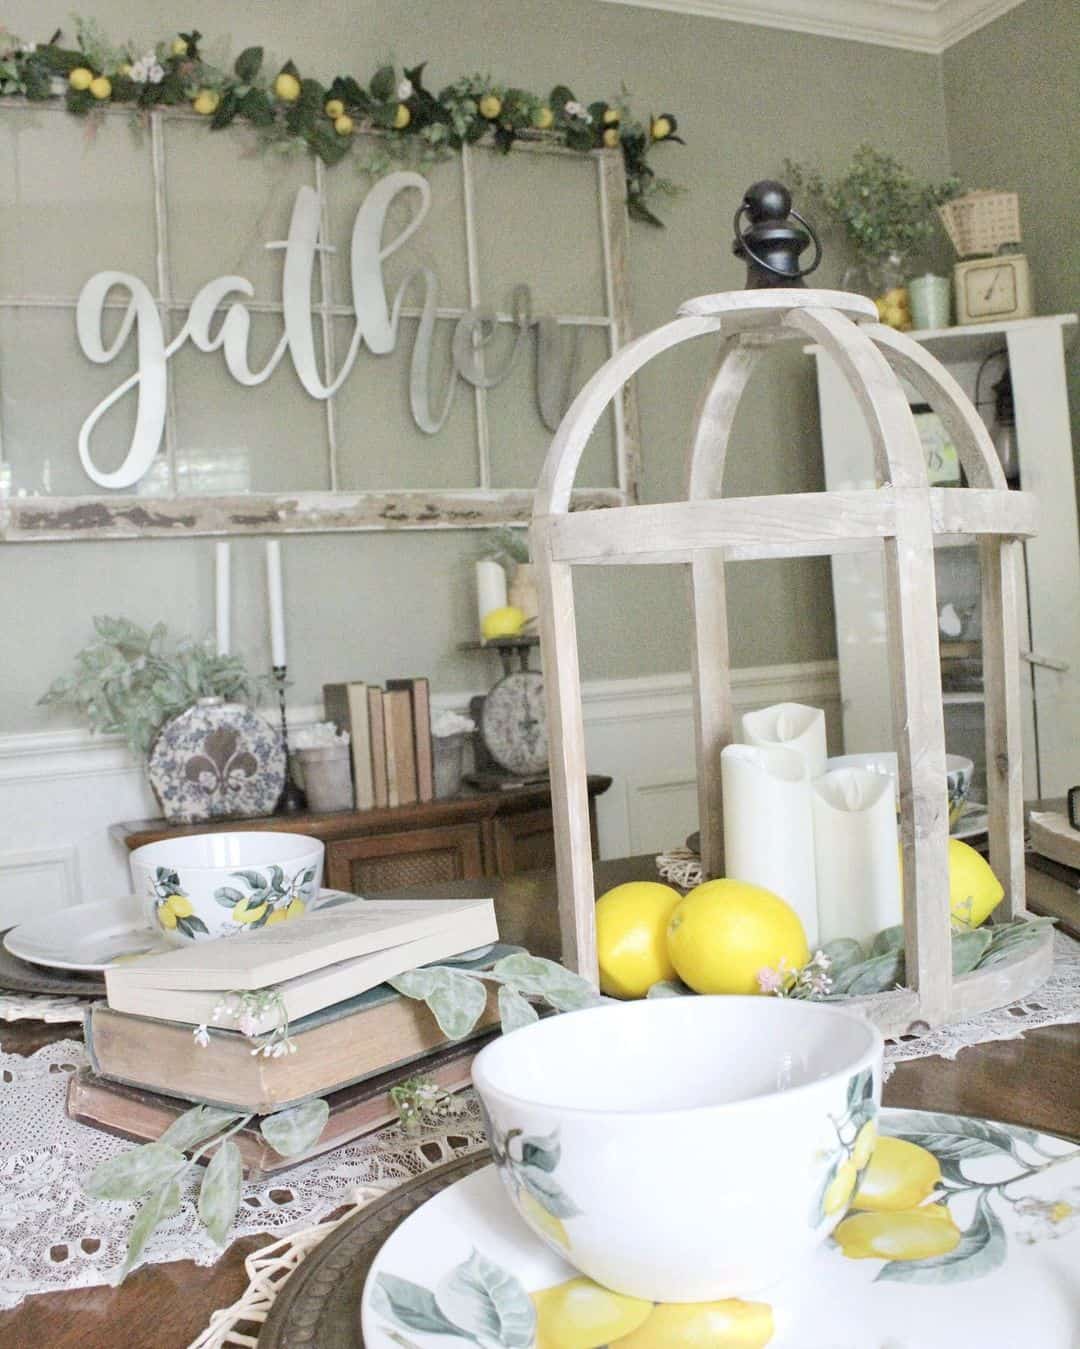 Vintage Furnishings and Citrus-Inspired Table Ornaments